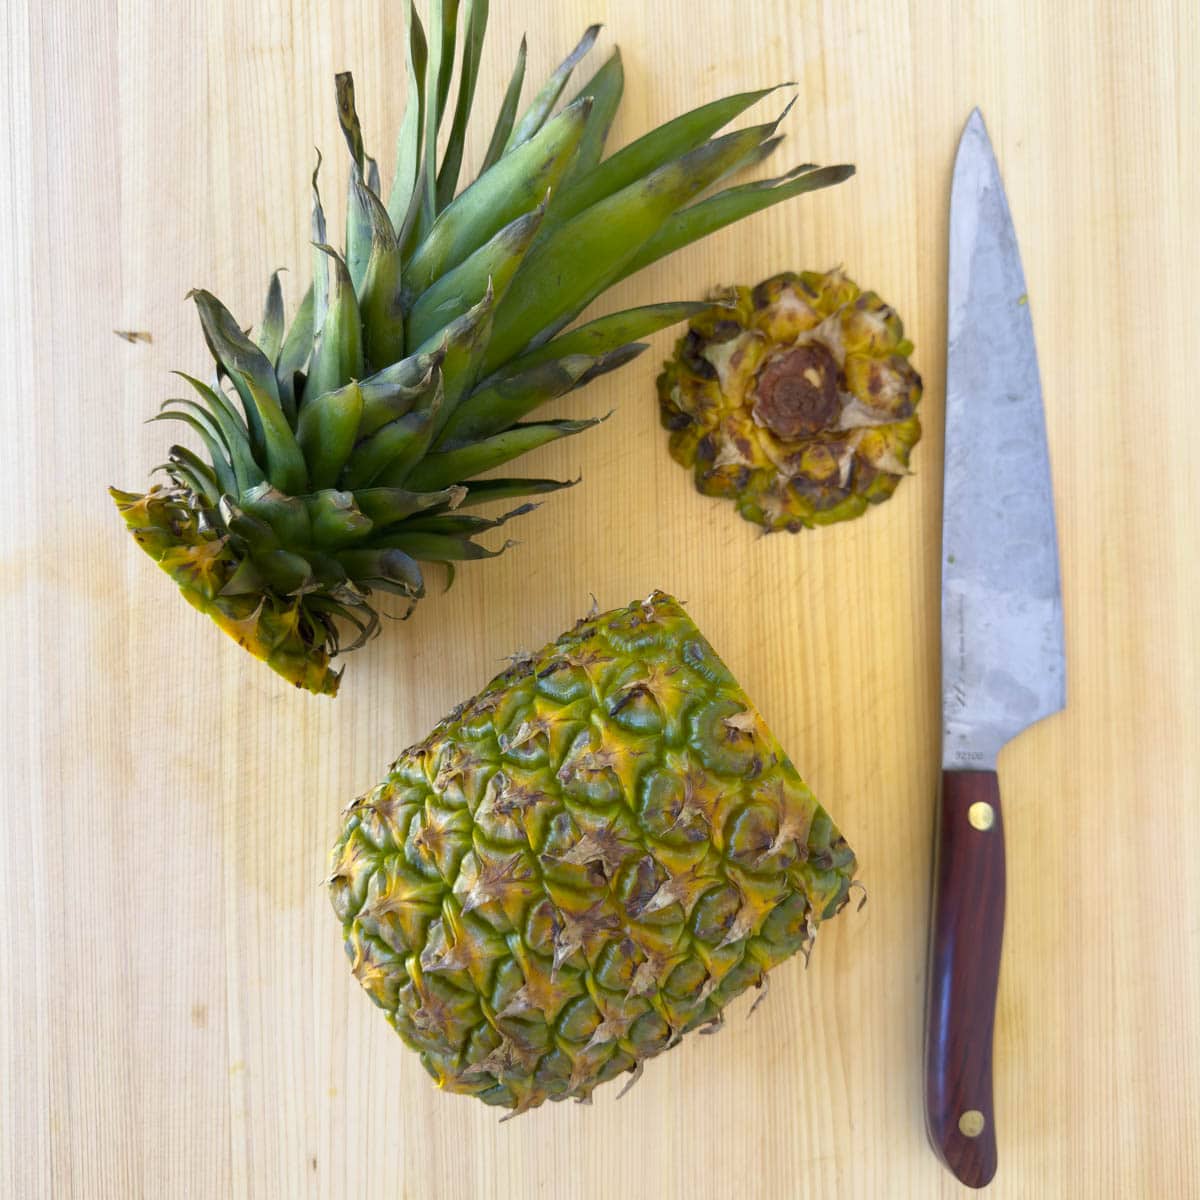 Cutting up a pineapple on a cutting board.